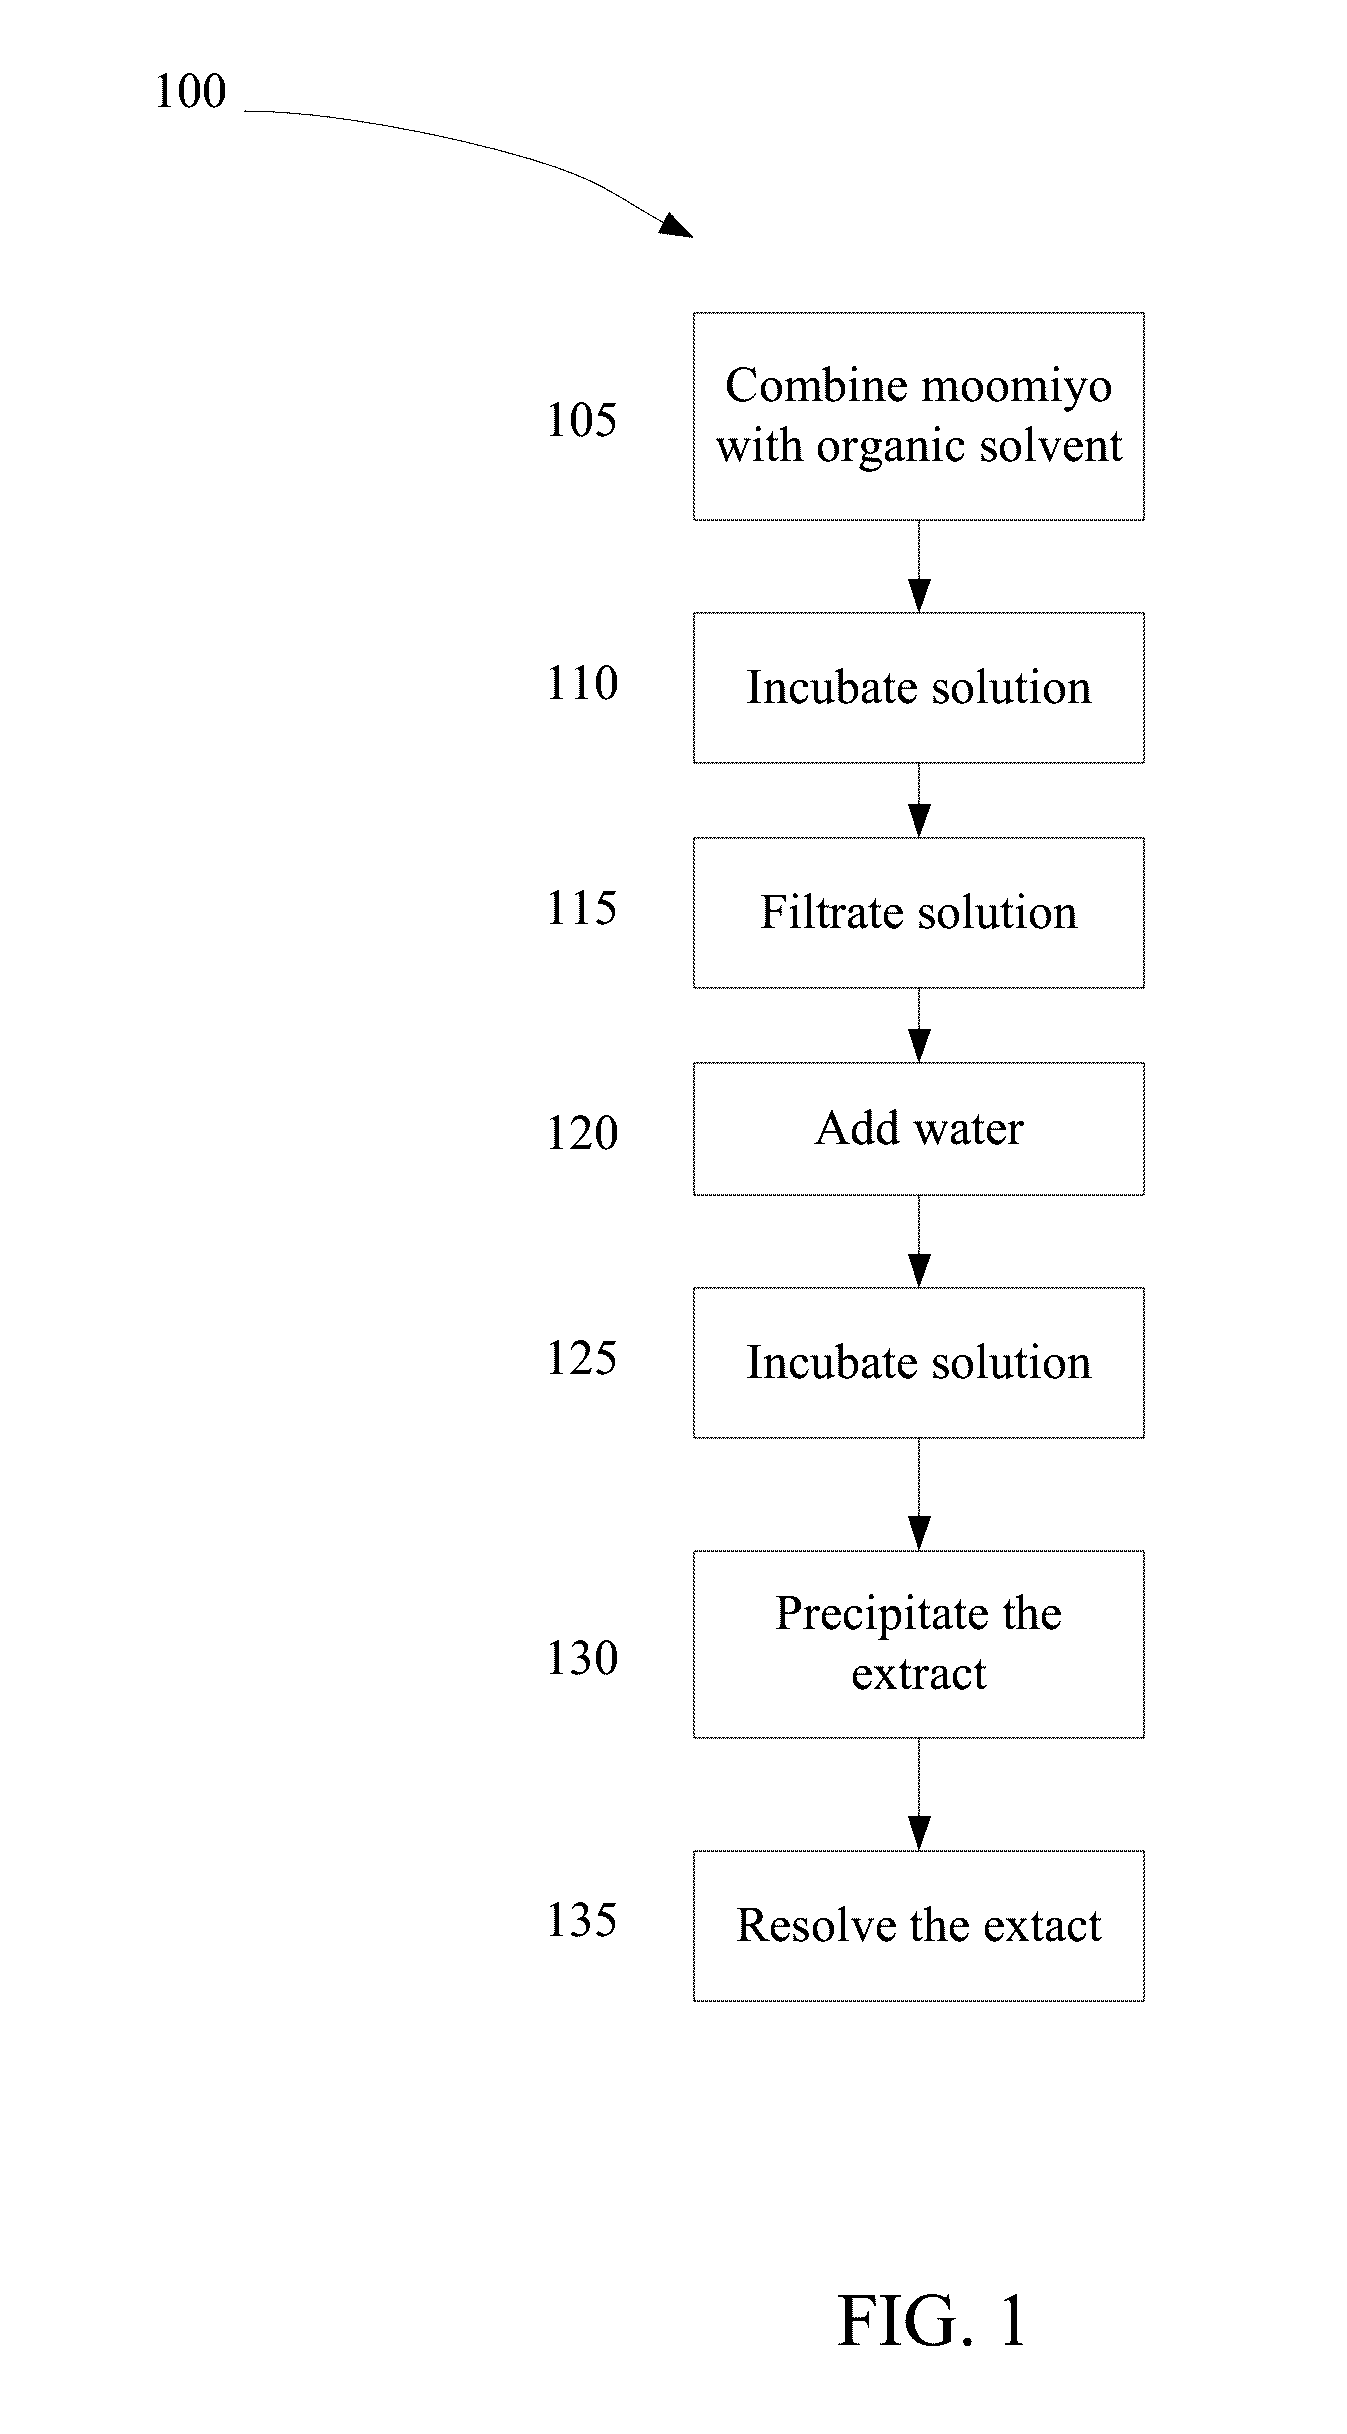 Method and system for extracting and using moomiyo compositions